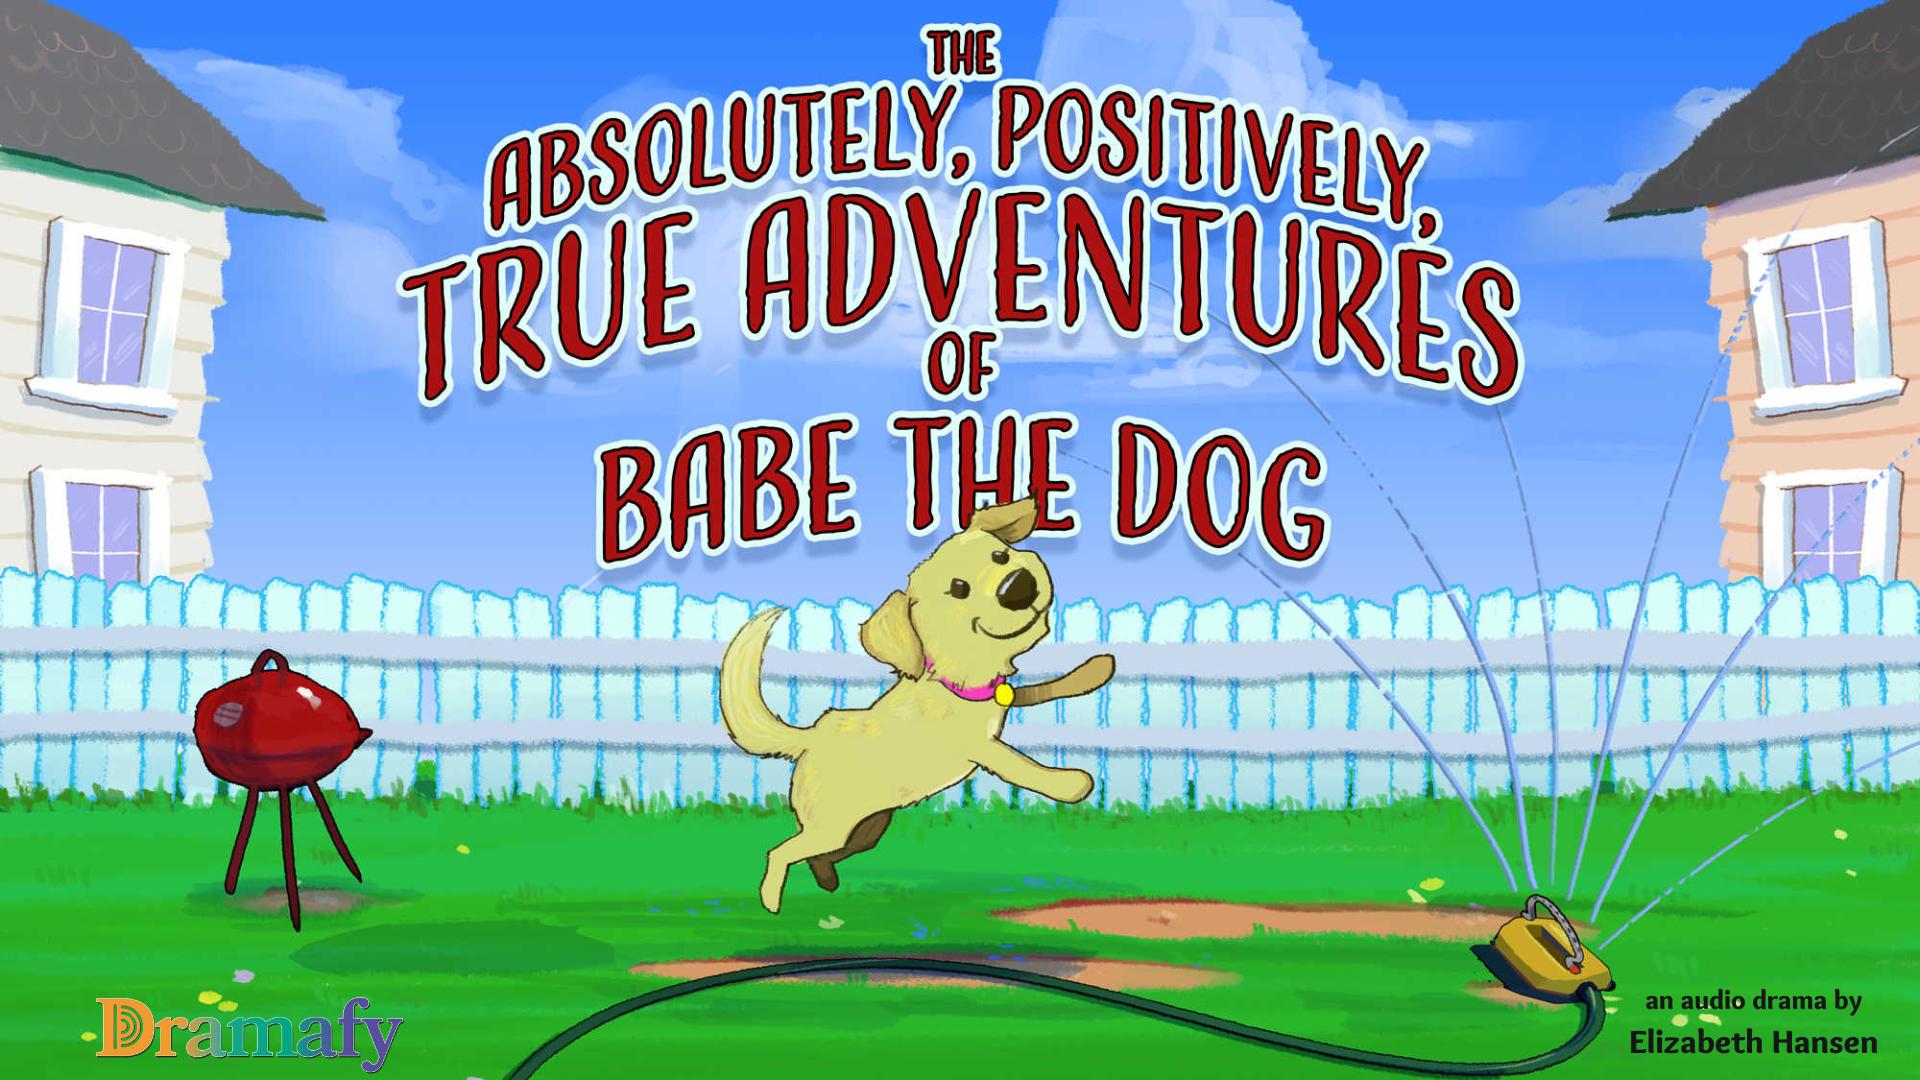 The Absolutely, Positively, True Adventures of Babe the Dog